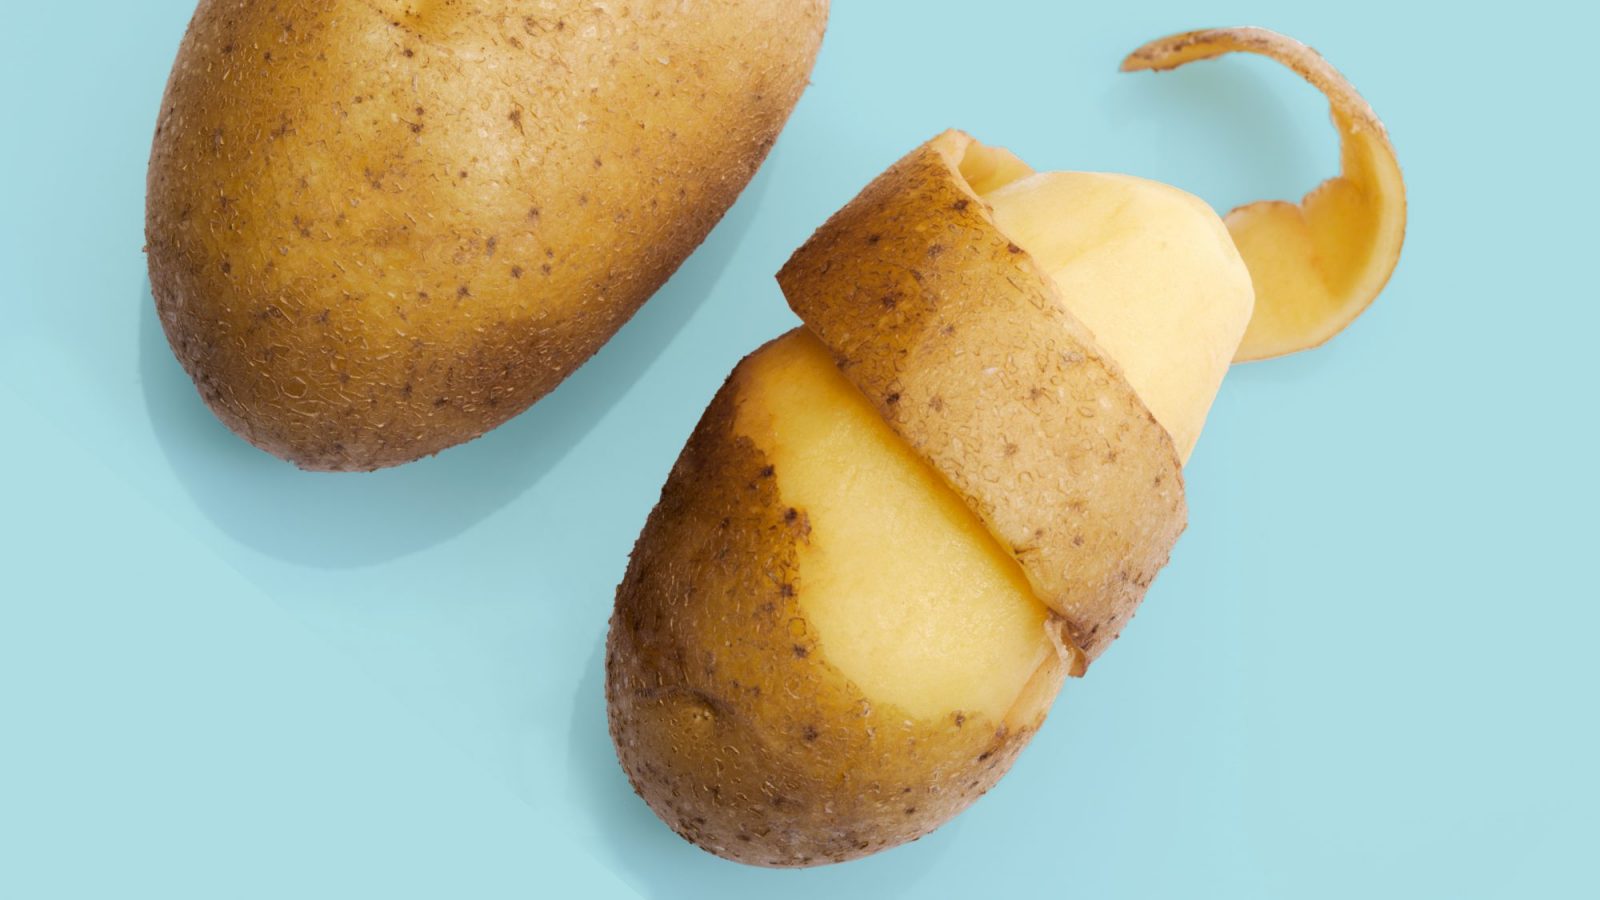 Does Your Real Age Match Your Taste Buds’ Age? Pick a Food for Each of These 16 Ingredients to Find Out Potatoes